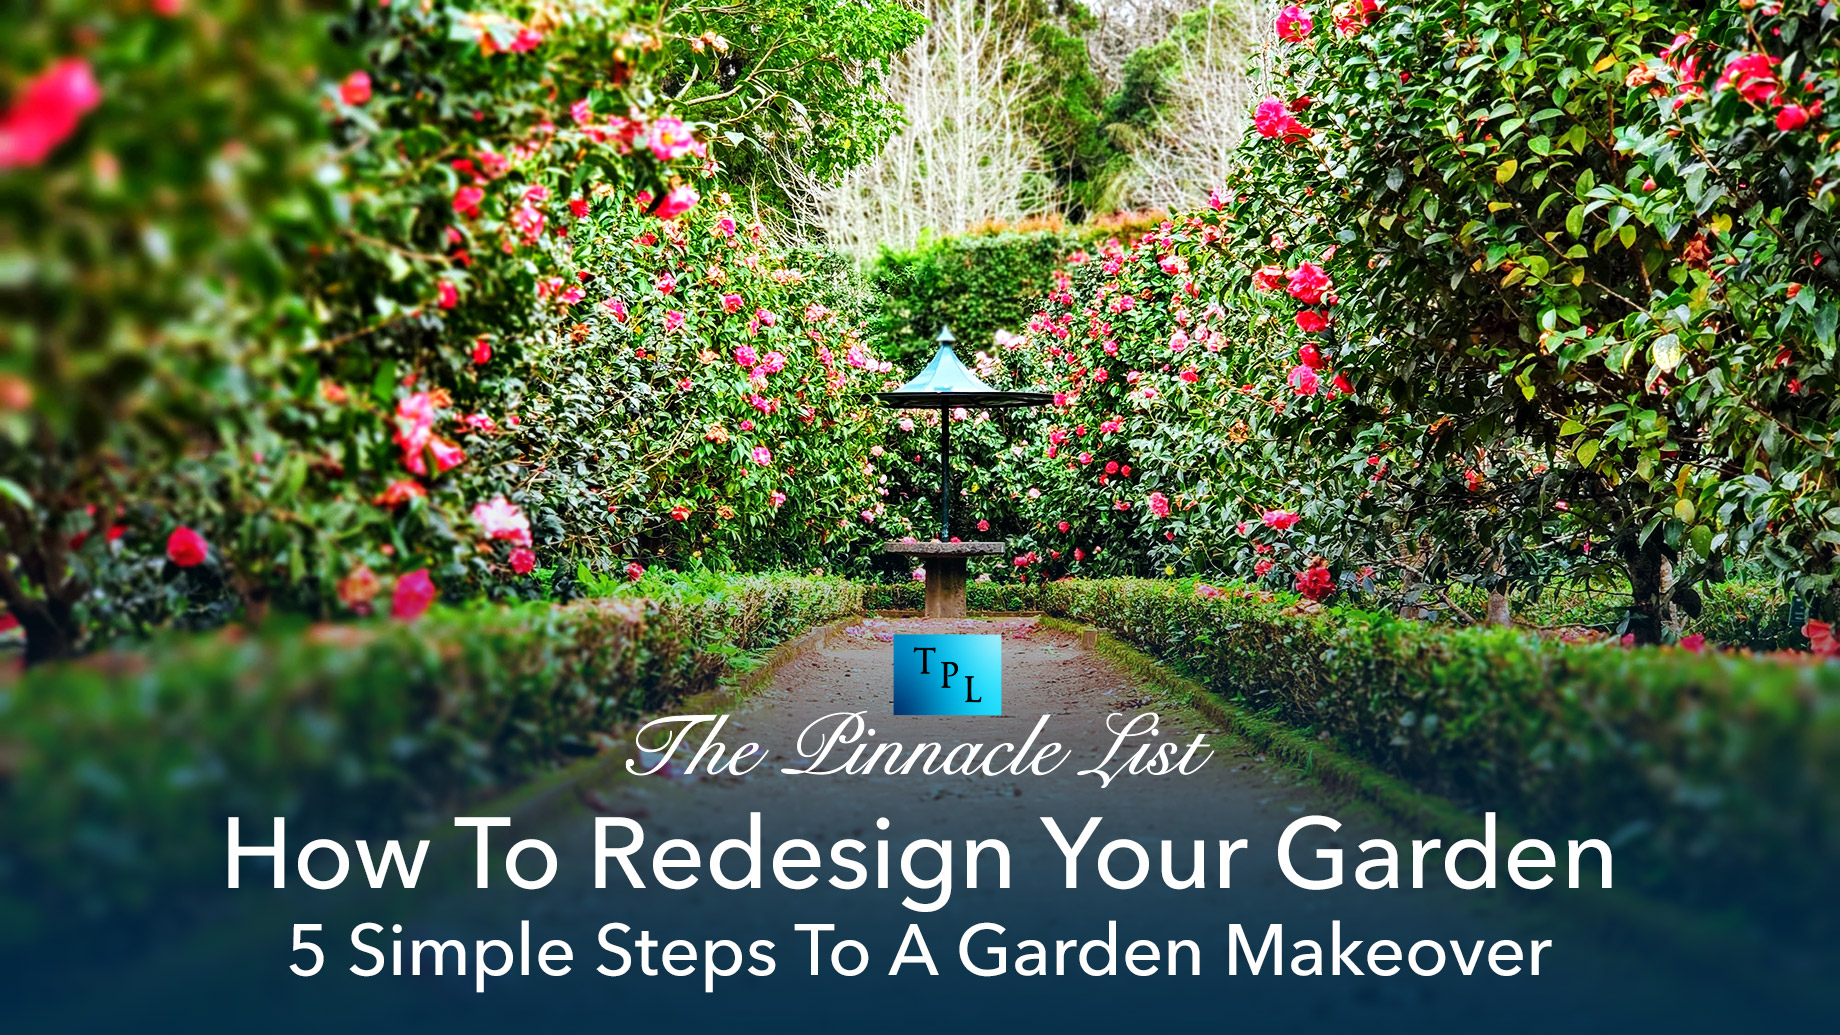 How To Redesign Your Garden - 5 Simple Steps To A Garden Makeover